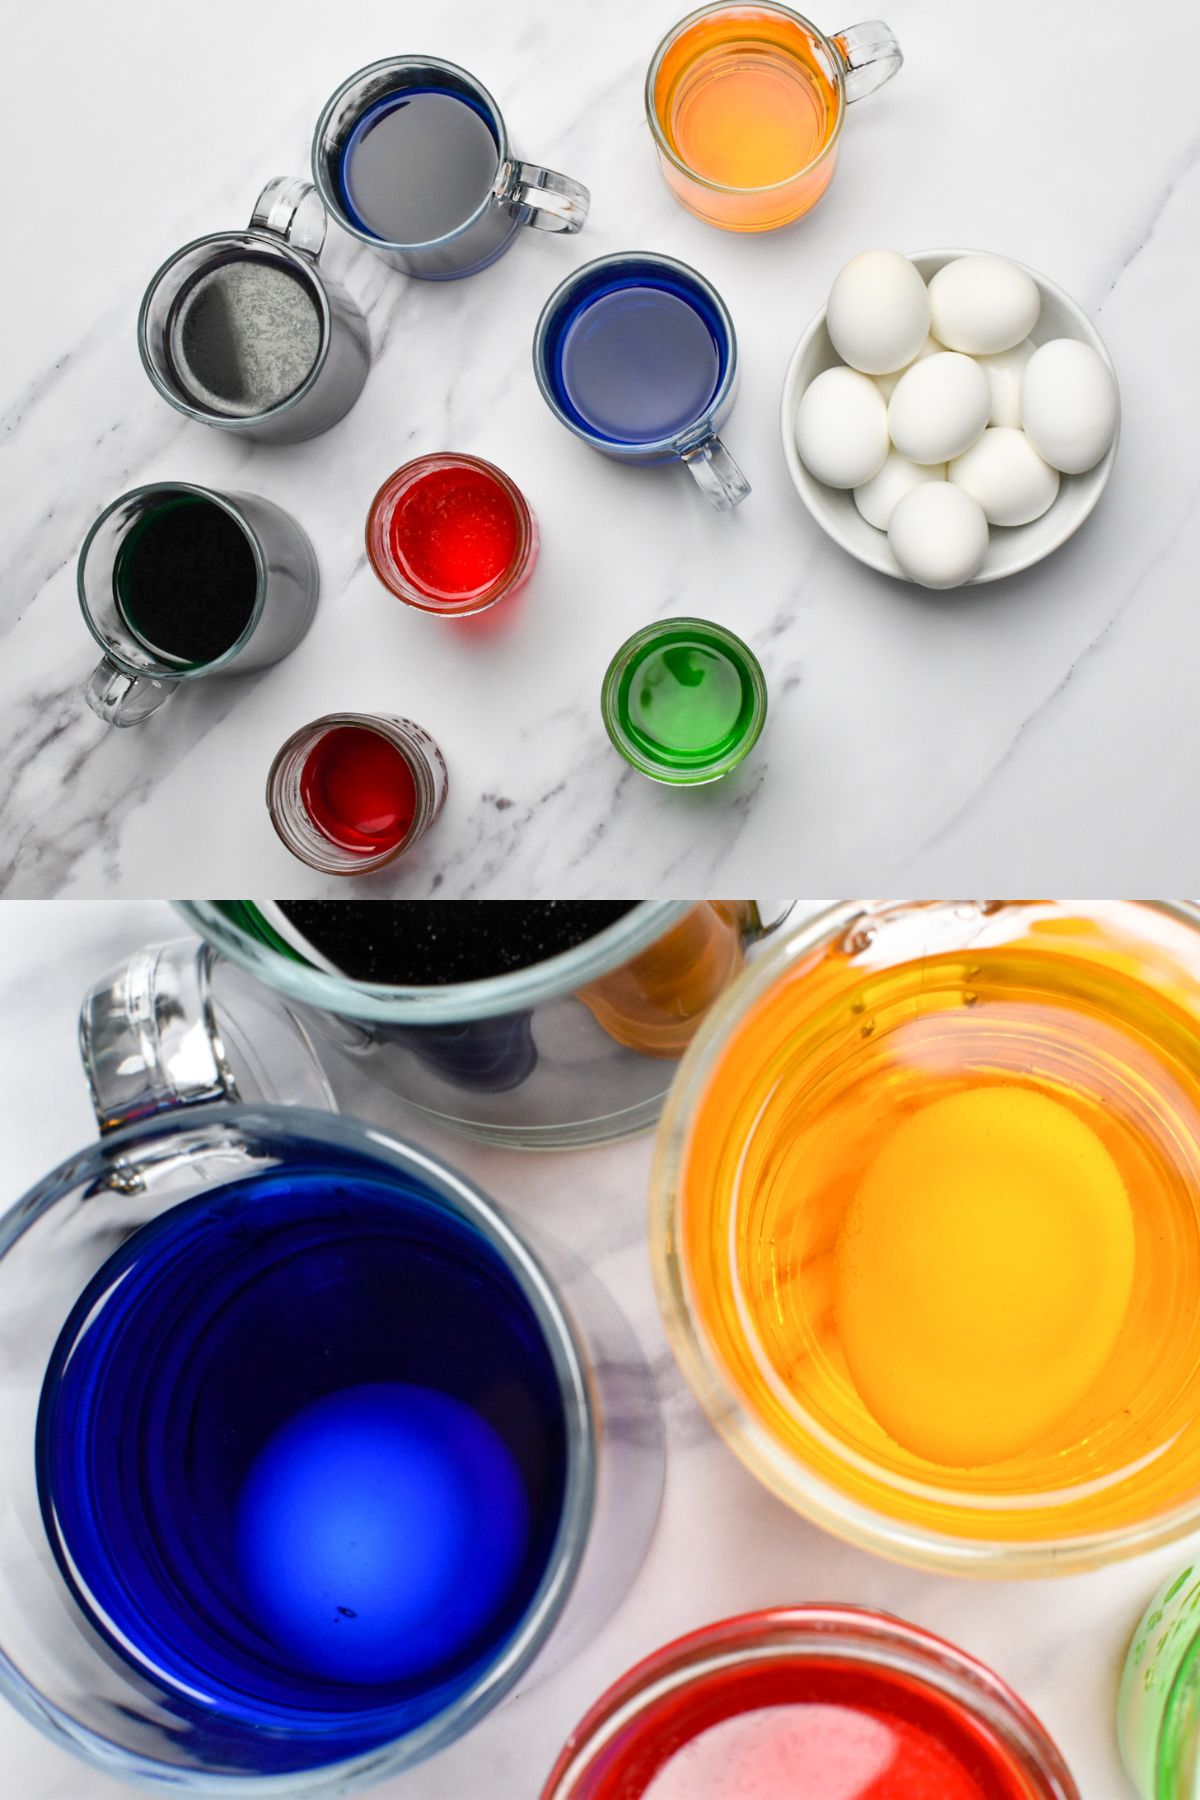 The colored water in cups and white eggs.